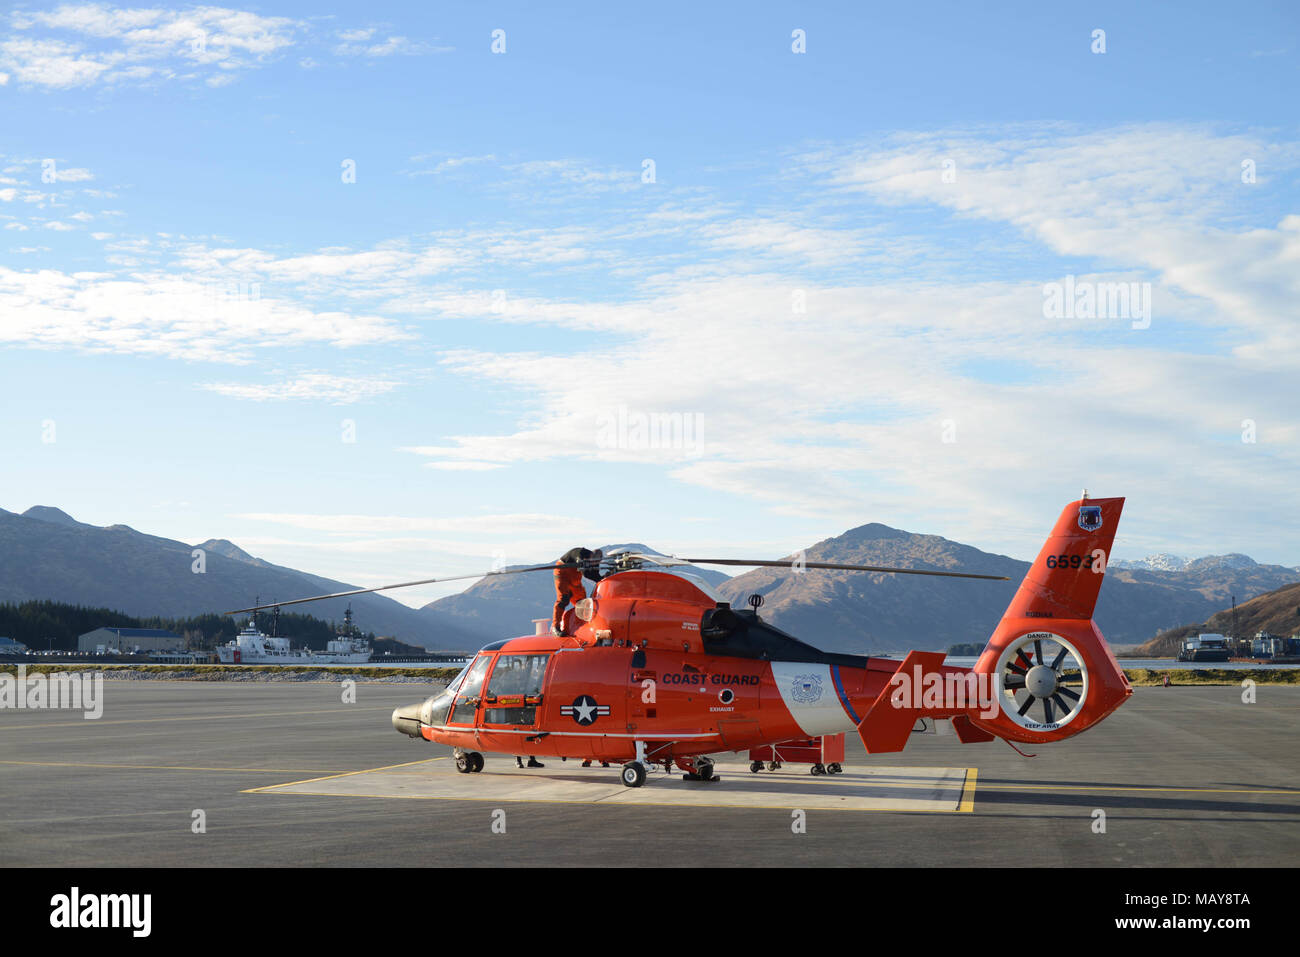 A Coast Guard Air Station Kodiak MH-65 Dolphin helicopter crew conducts a preflight on a Dolphin helicopter at Air Station Kodiak, Alaska, Nov. 3, 2017. Dolphin helicopters deploy aboard cutters to conduct Coast Guard missions in the Alaska patrol division. U.S. Coast Guard photo by Petty Officer 1st Class Charly Hengen. Stock Photo